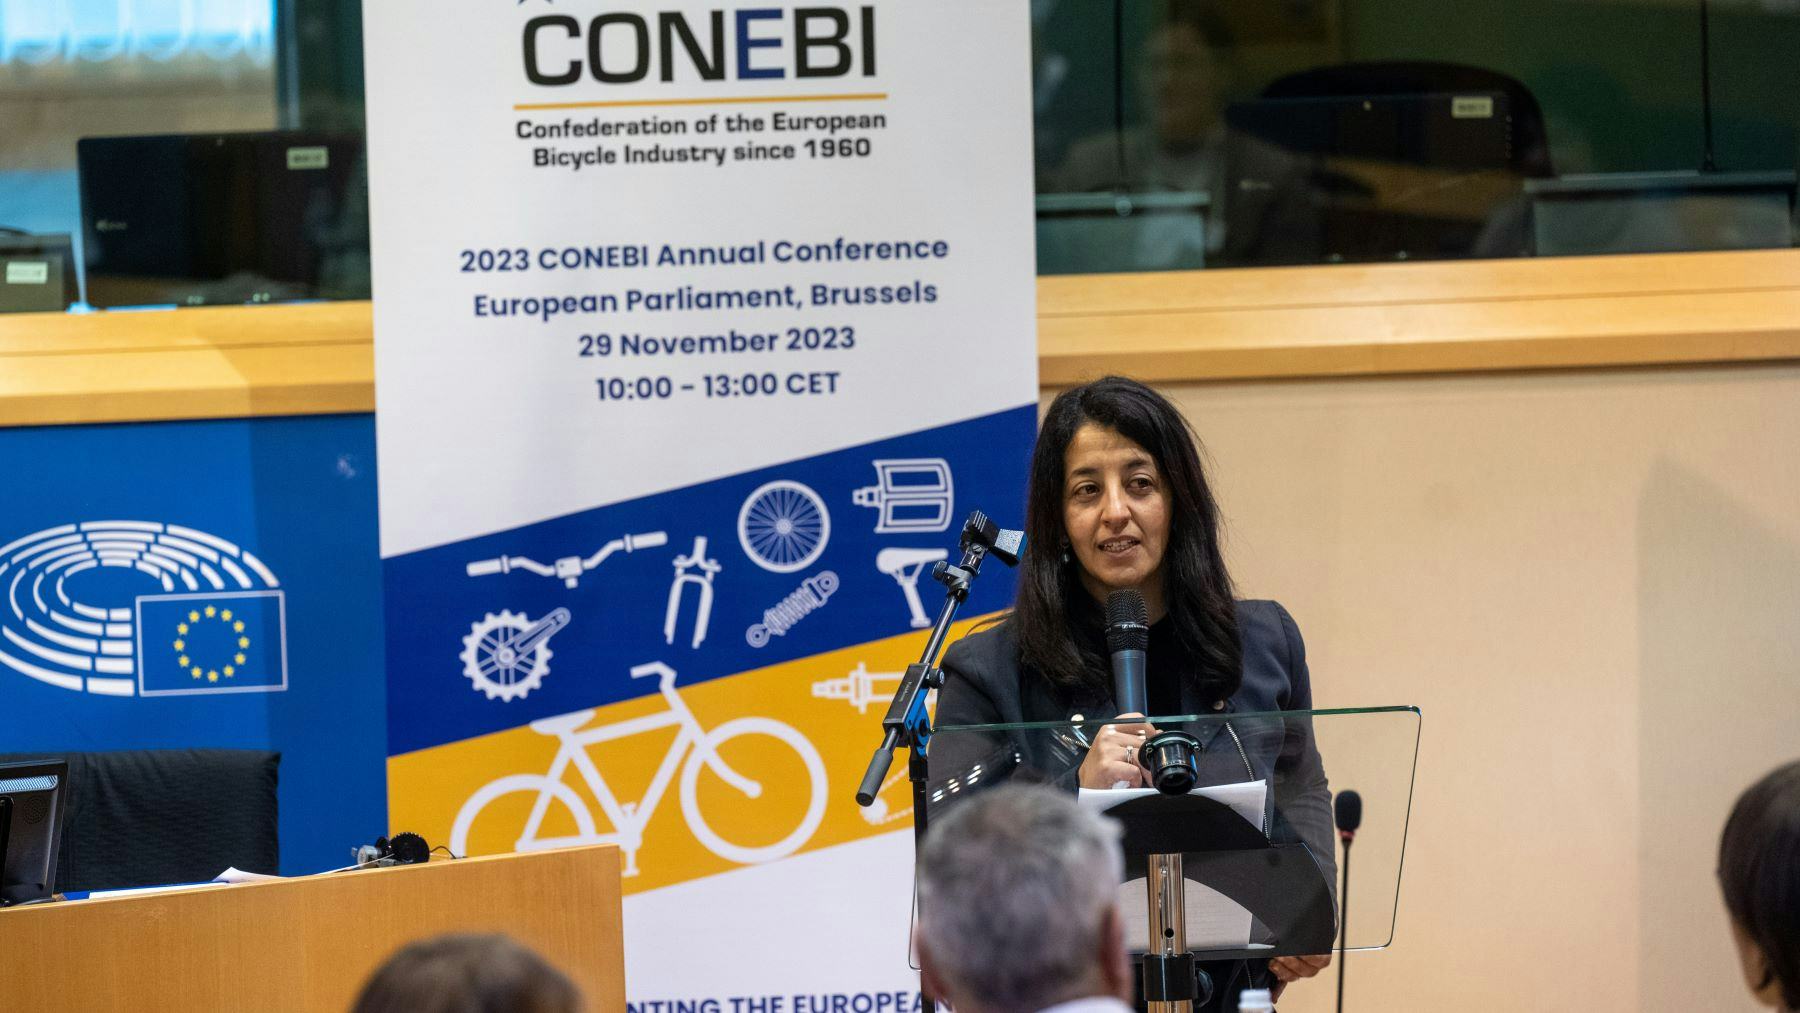 “The time has come for a strong commitment at EU level to cycling as a fully-fledged mode of transport and to its industry as one of the key industries in Europe,” MEP Karima Delli told the audience of the CONEBI annual conference. 